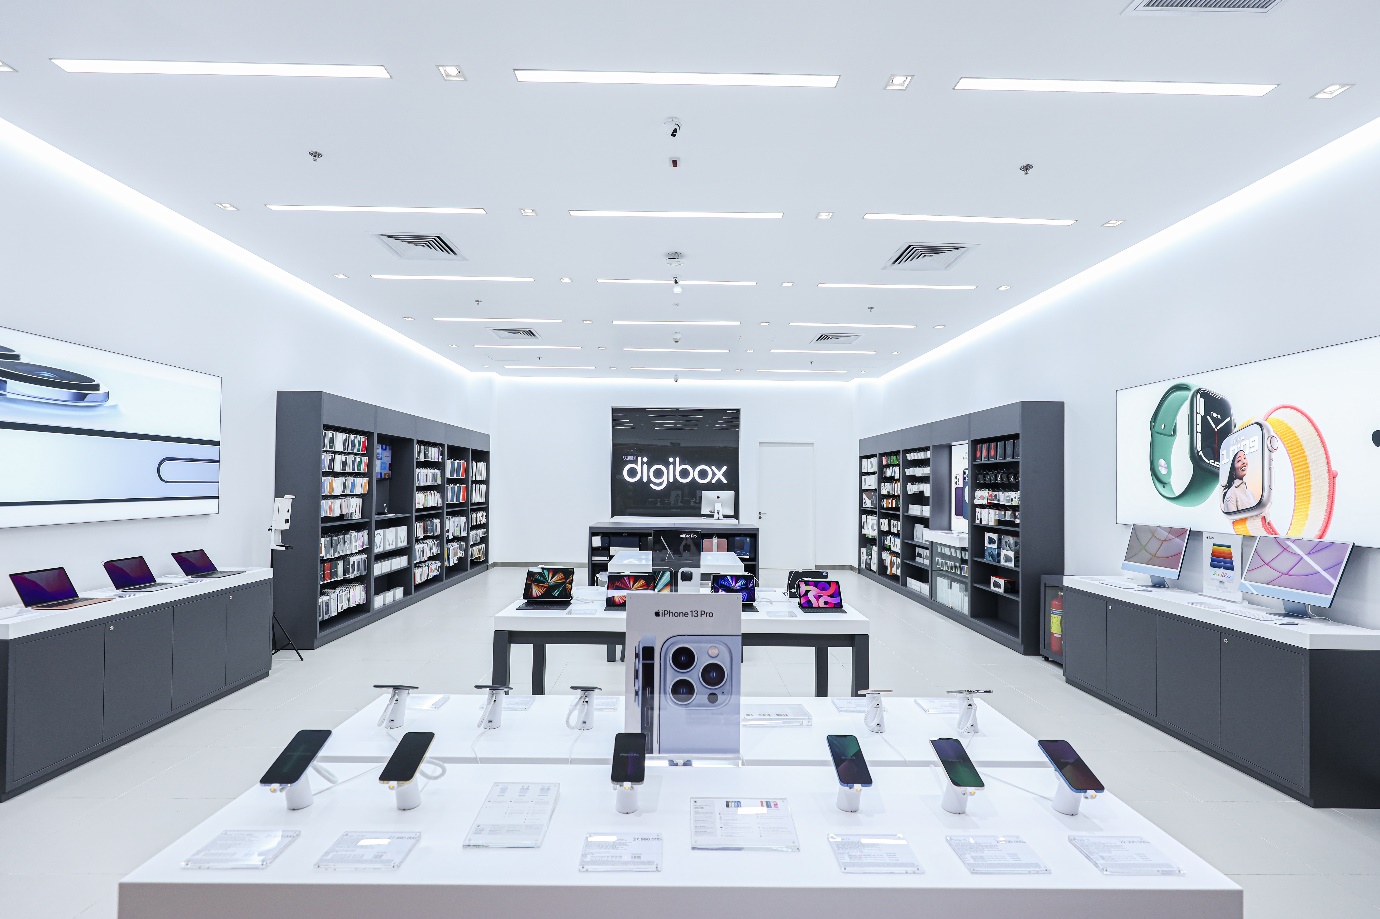 Digibox opens Apple Authorized Store with many incentives - Photo 1.